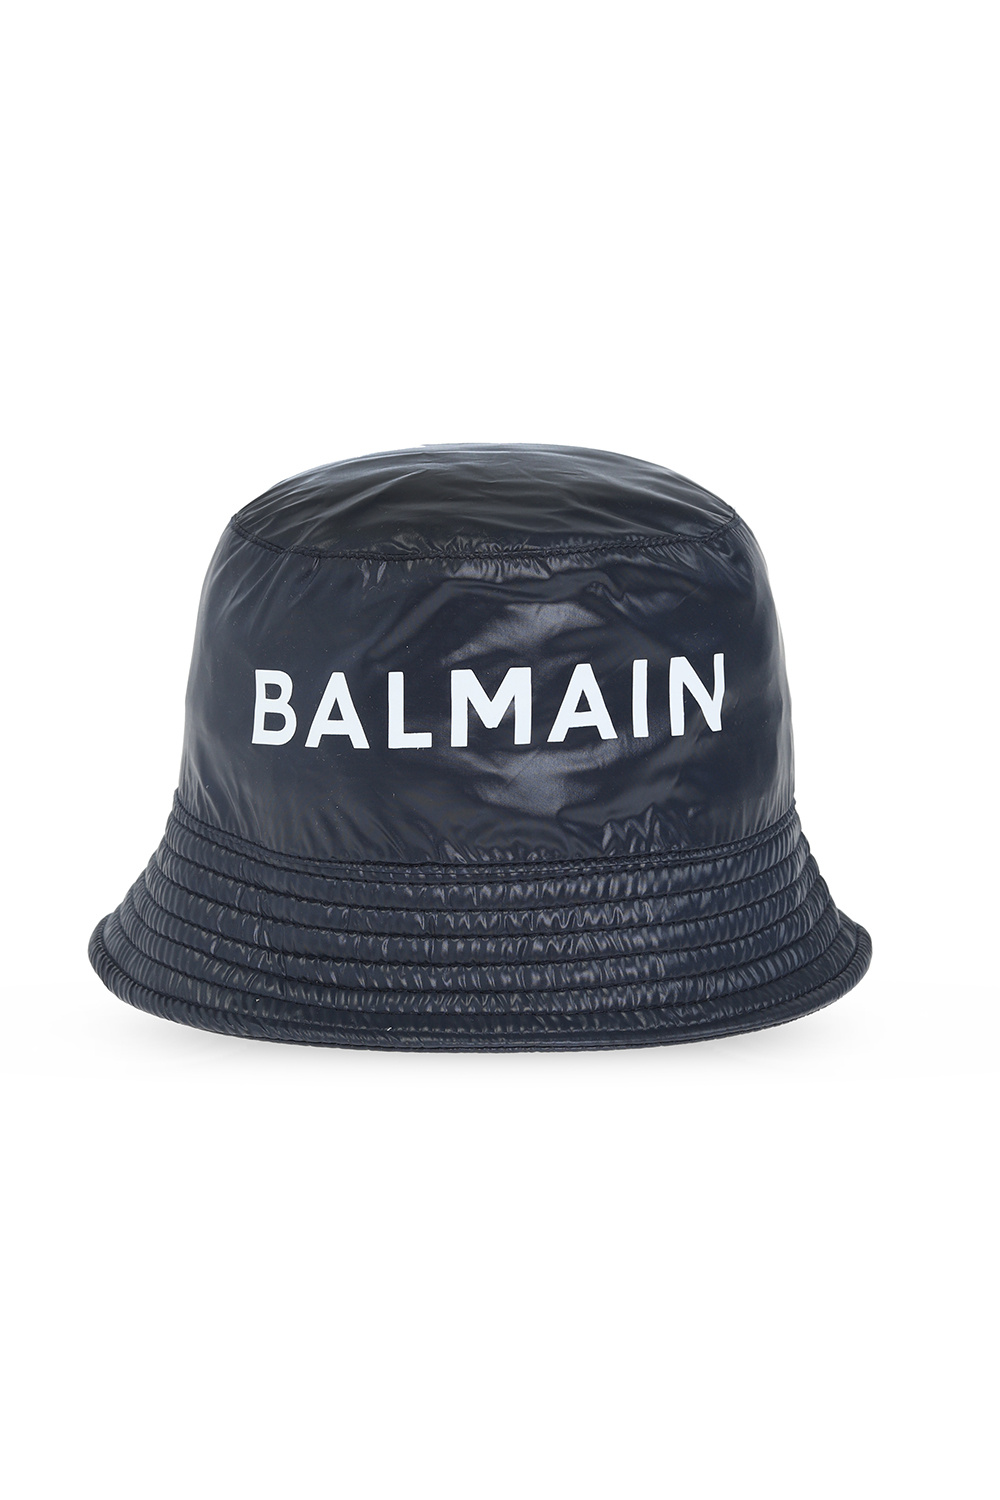 Balmain Kids Finish any casual or athletic look with the 6-Panel Curved Brim NB Classic Cap from New Balance